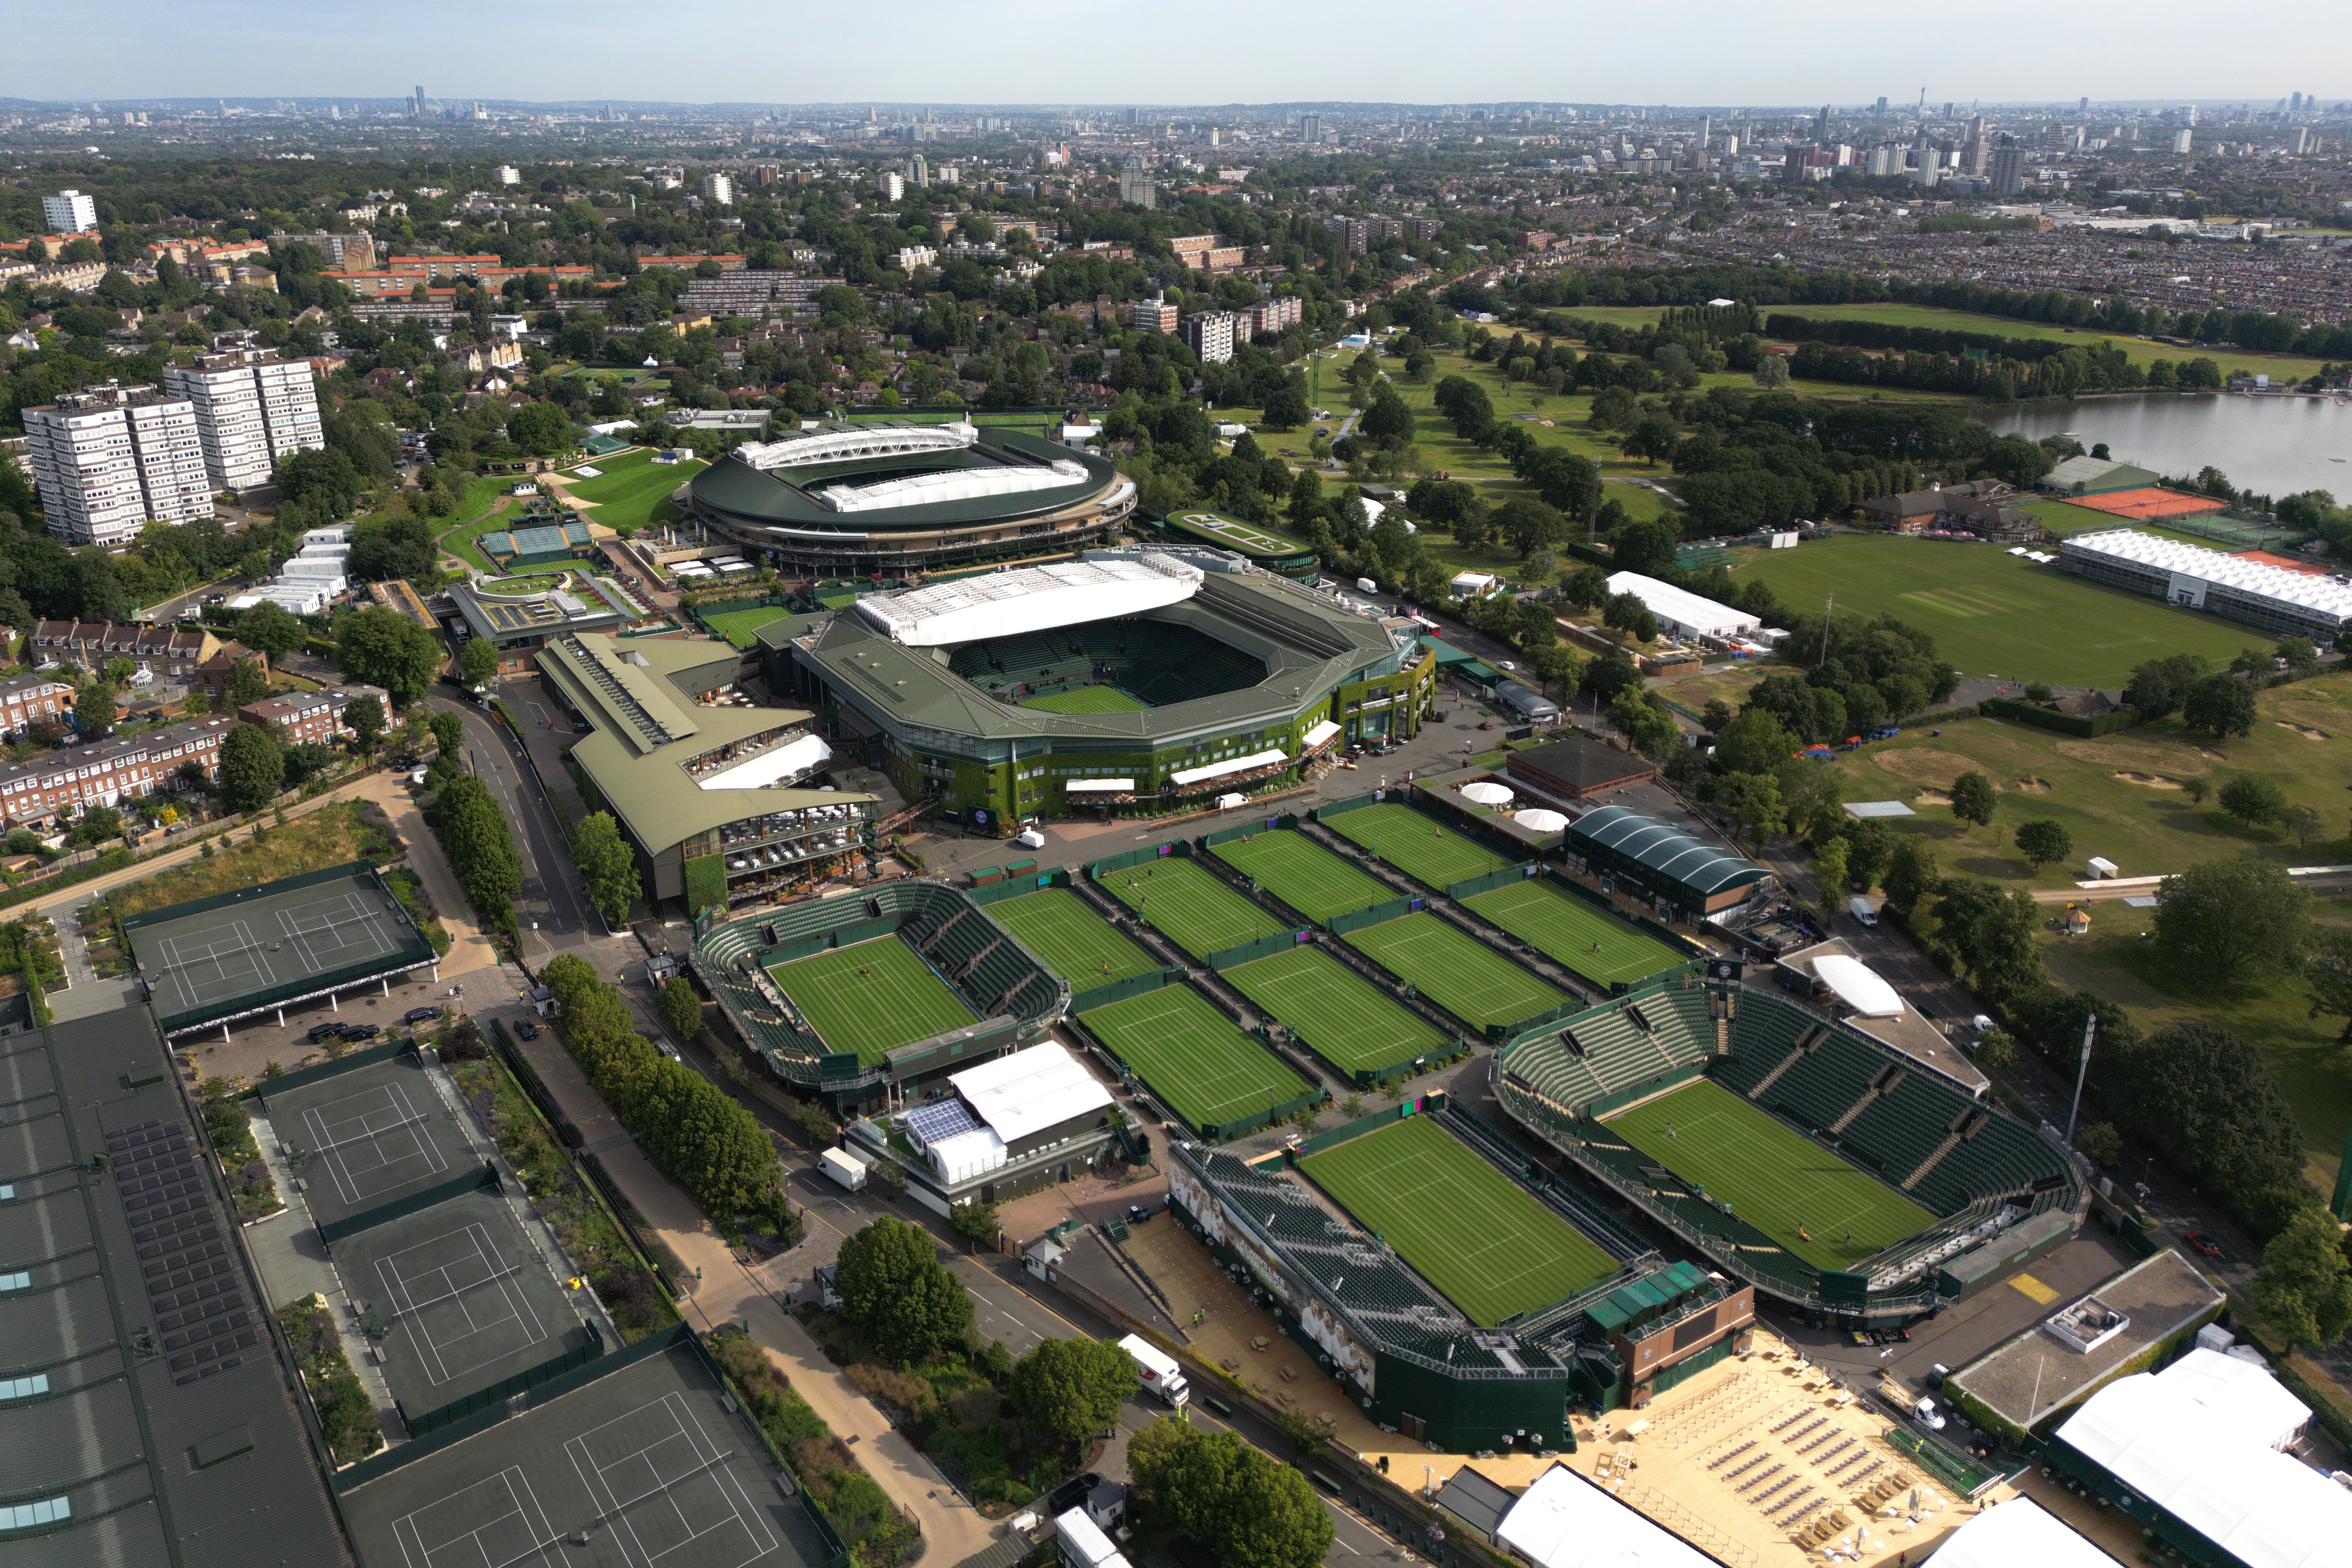 A possible expansion of the Wimbledon site has suffered a blow